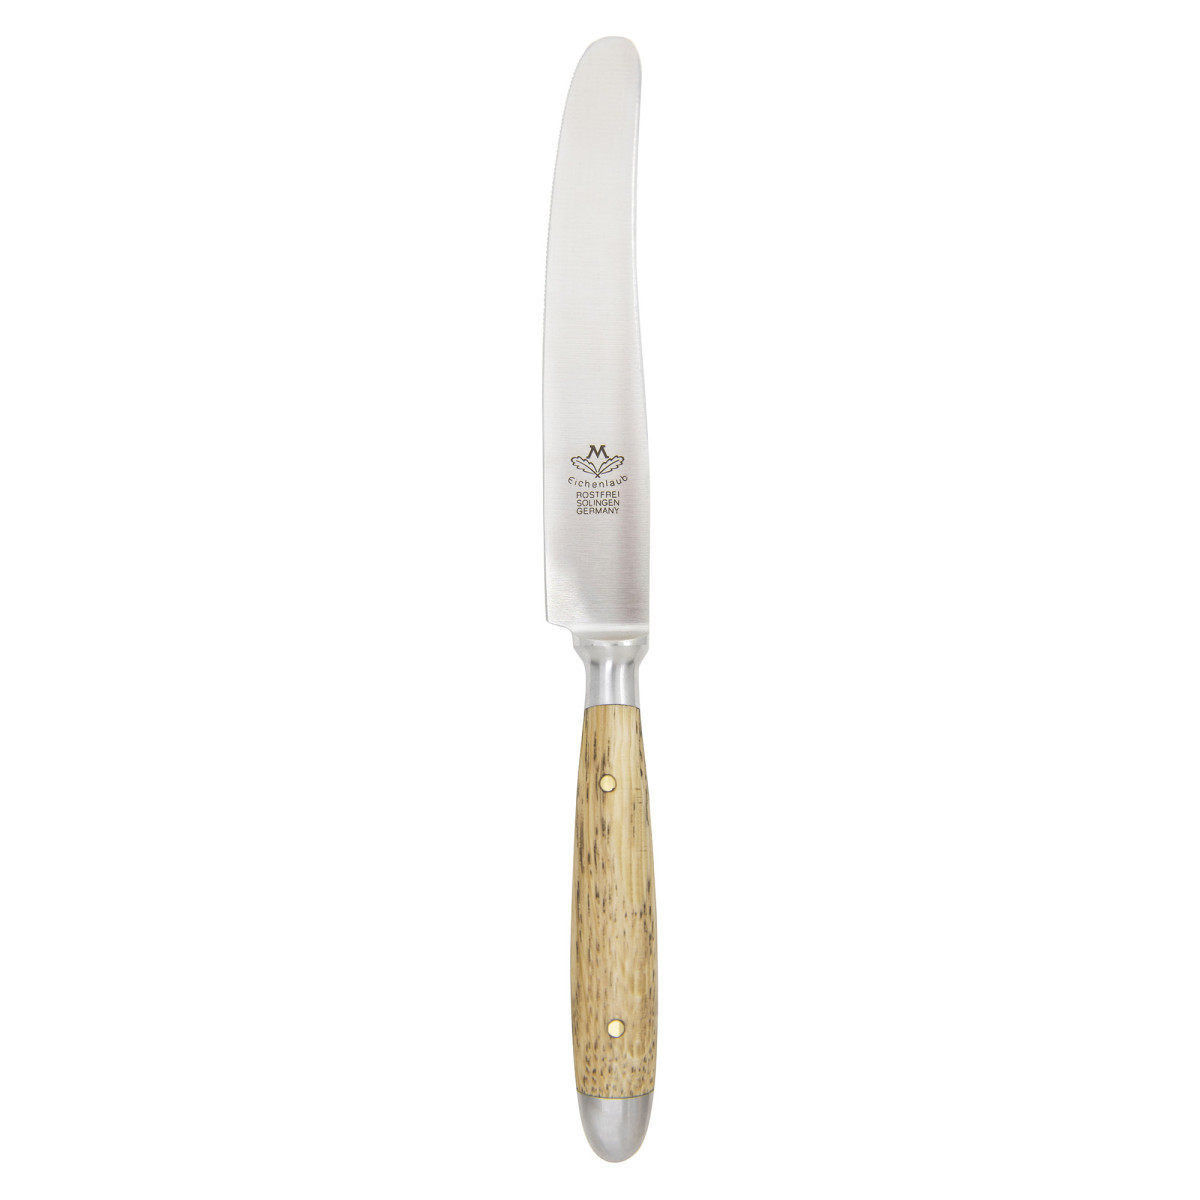 Eichenlaub Butter and Cheese Serving Knives Stainless